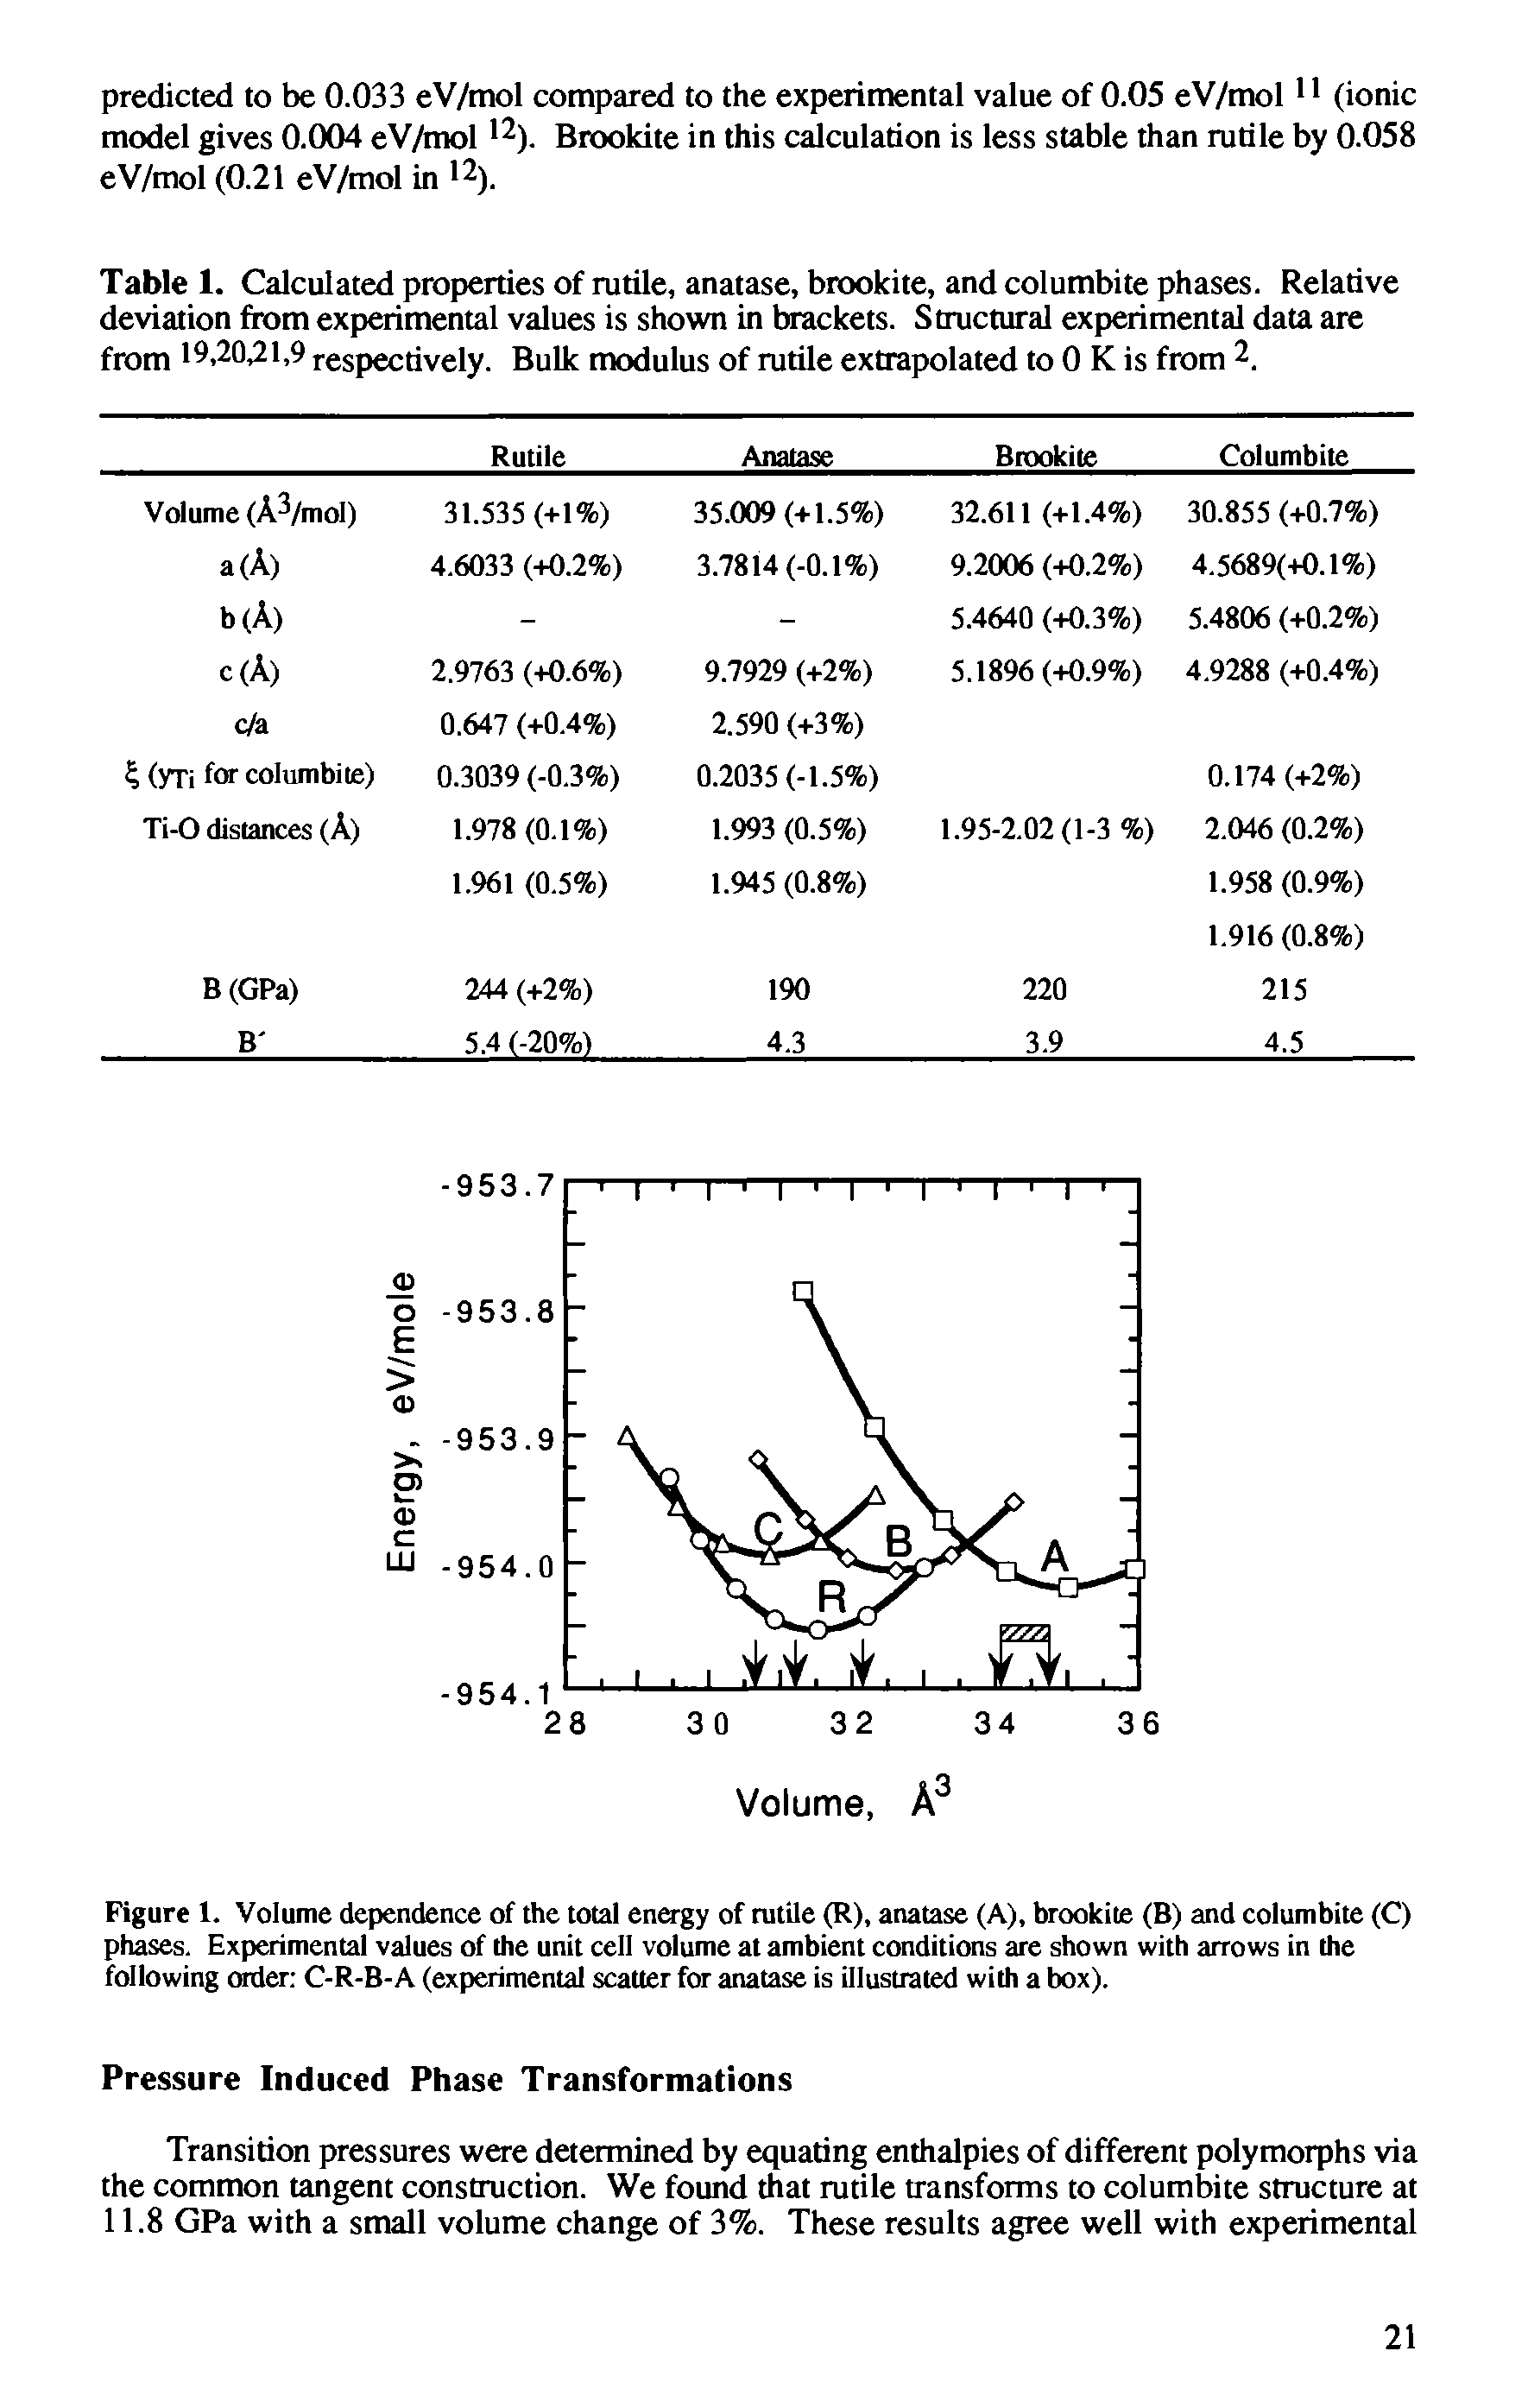 Table 1. Calculated properties of ratile, anatase, brookite, and columbite phases. Relative deviation from experimental values is shown in brackets. Structural experimental data are from 19,20,21,9 respectively. Bulk modulus of ratile extrapolated to 0 K is from 2.